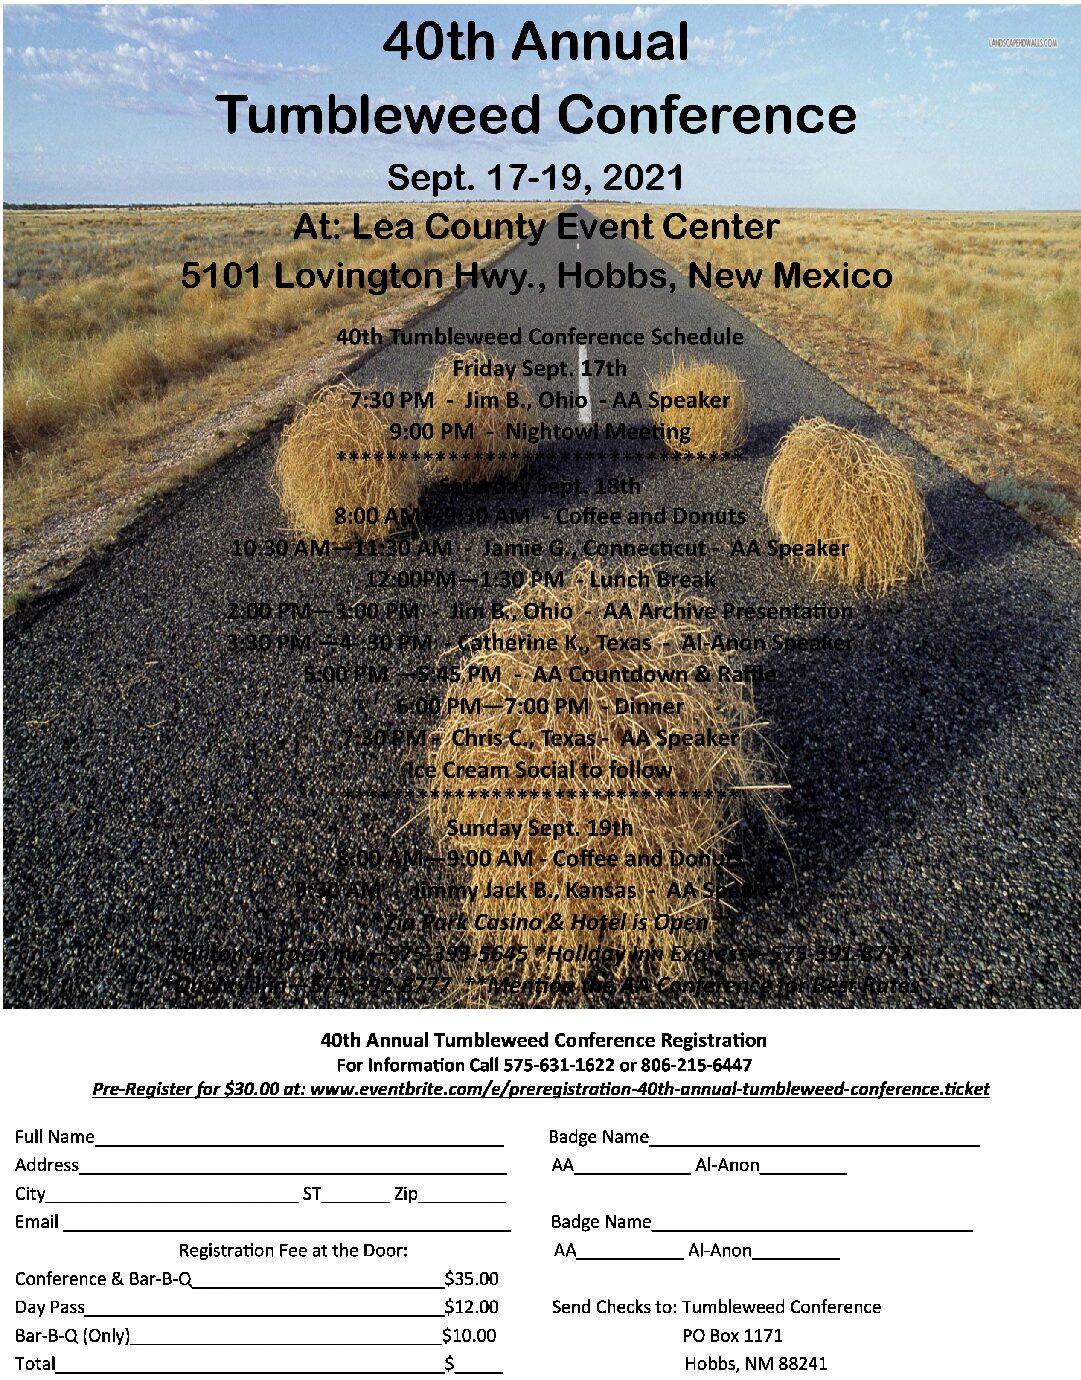 40th Annual Tumbleweed Conference